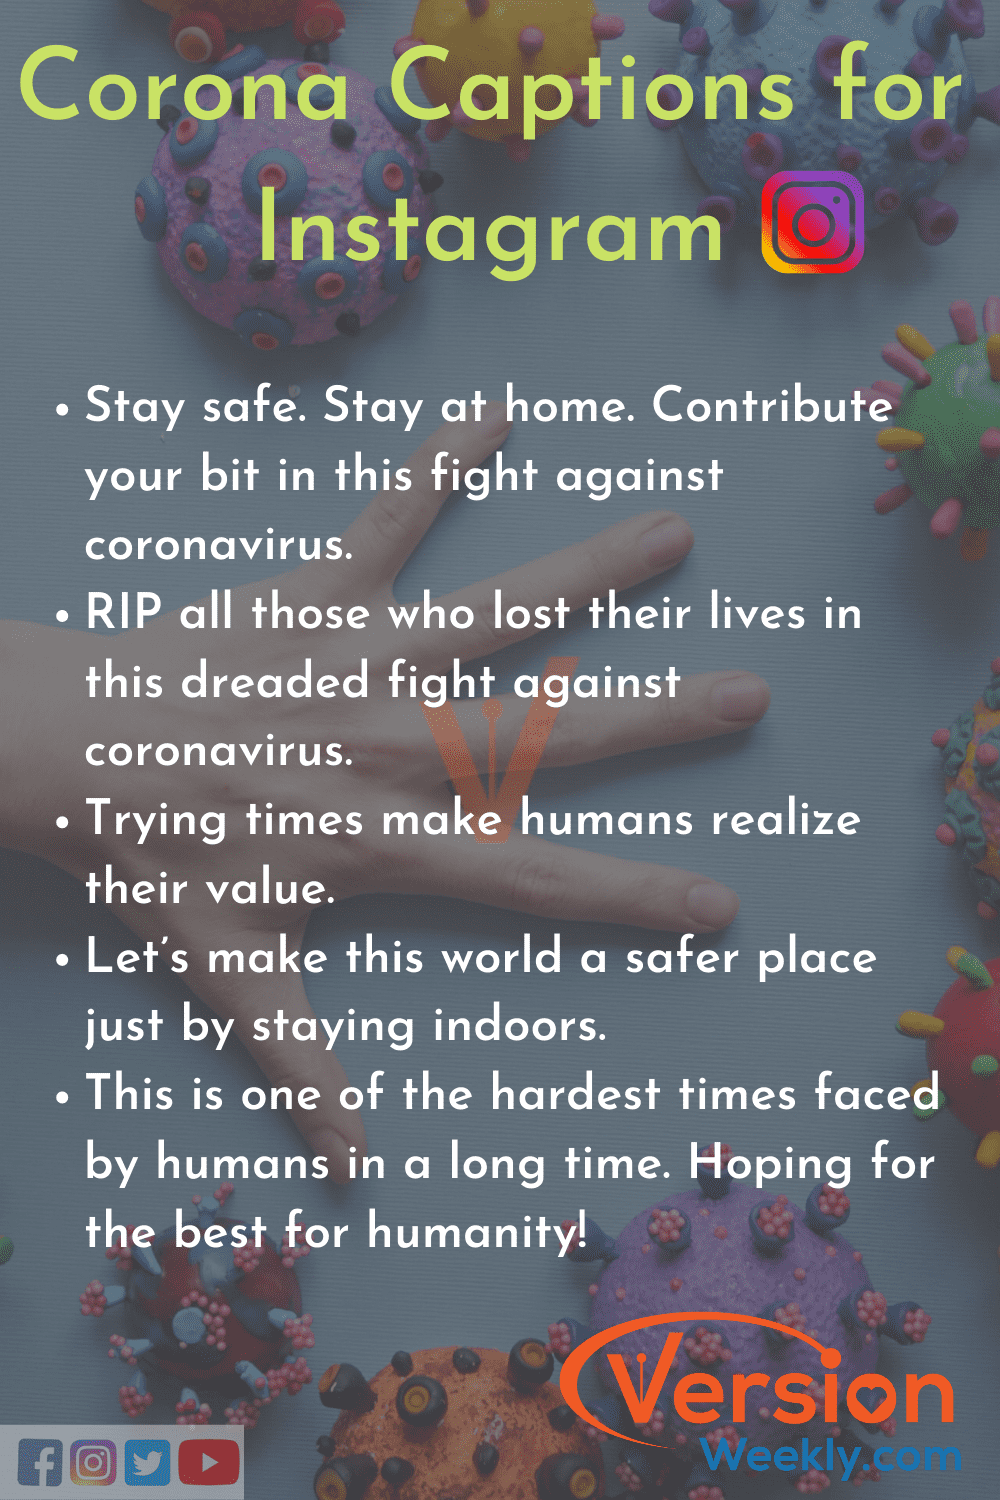 100+ Quarantine Instagram Captions in 2021 | Best Instagram Captions for  Coronavirus for your 'Stay Home' Pictures – Version Weekly